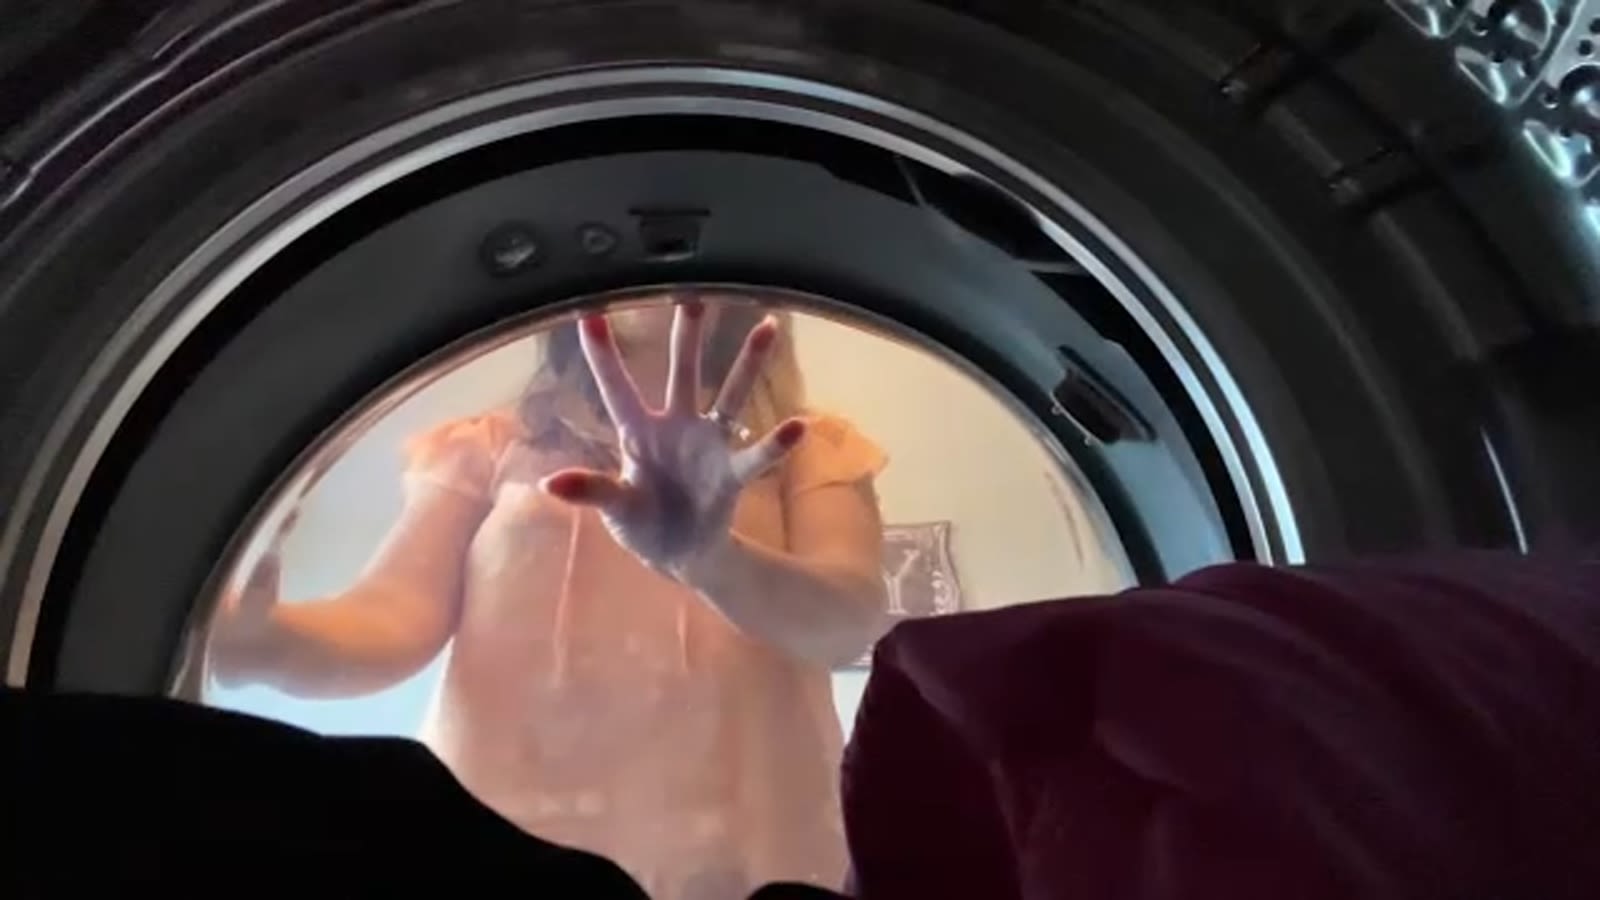 Built-in washing machine filters quick fix to microplastic problem, advocates say